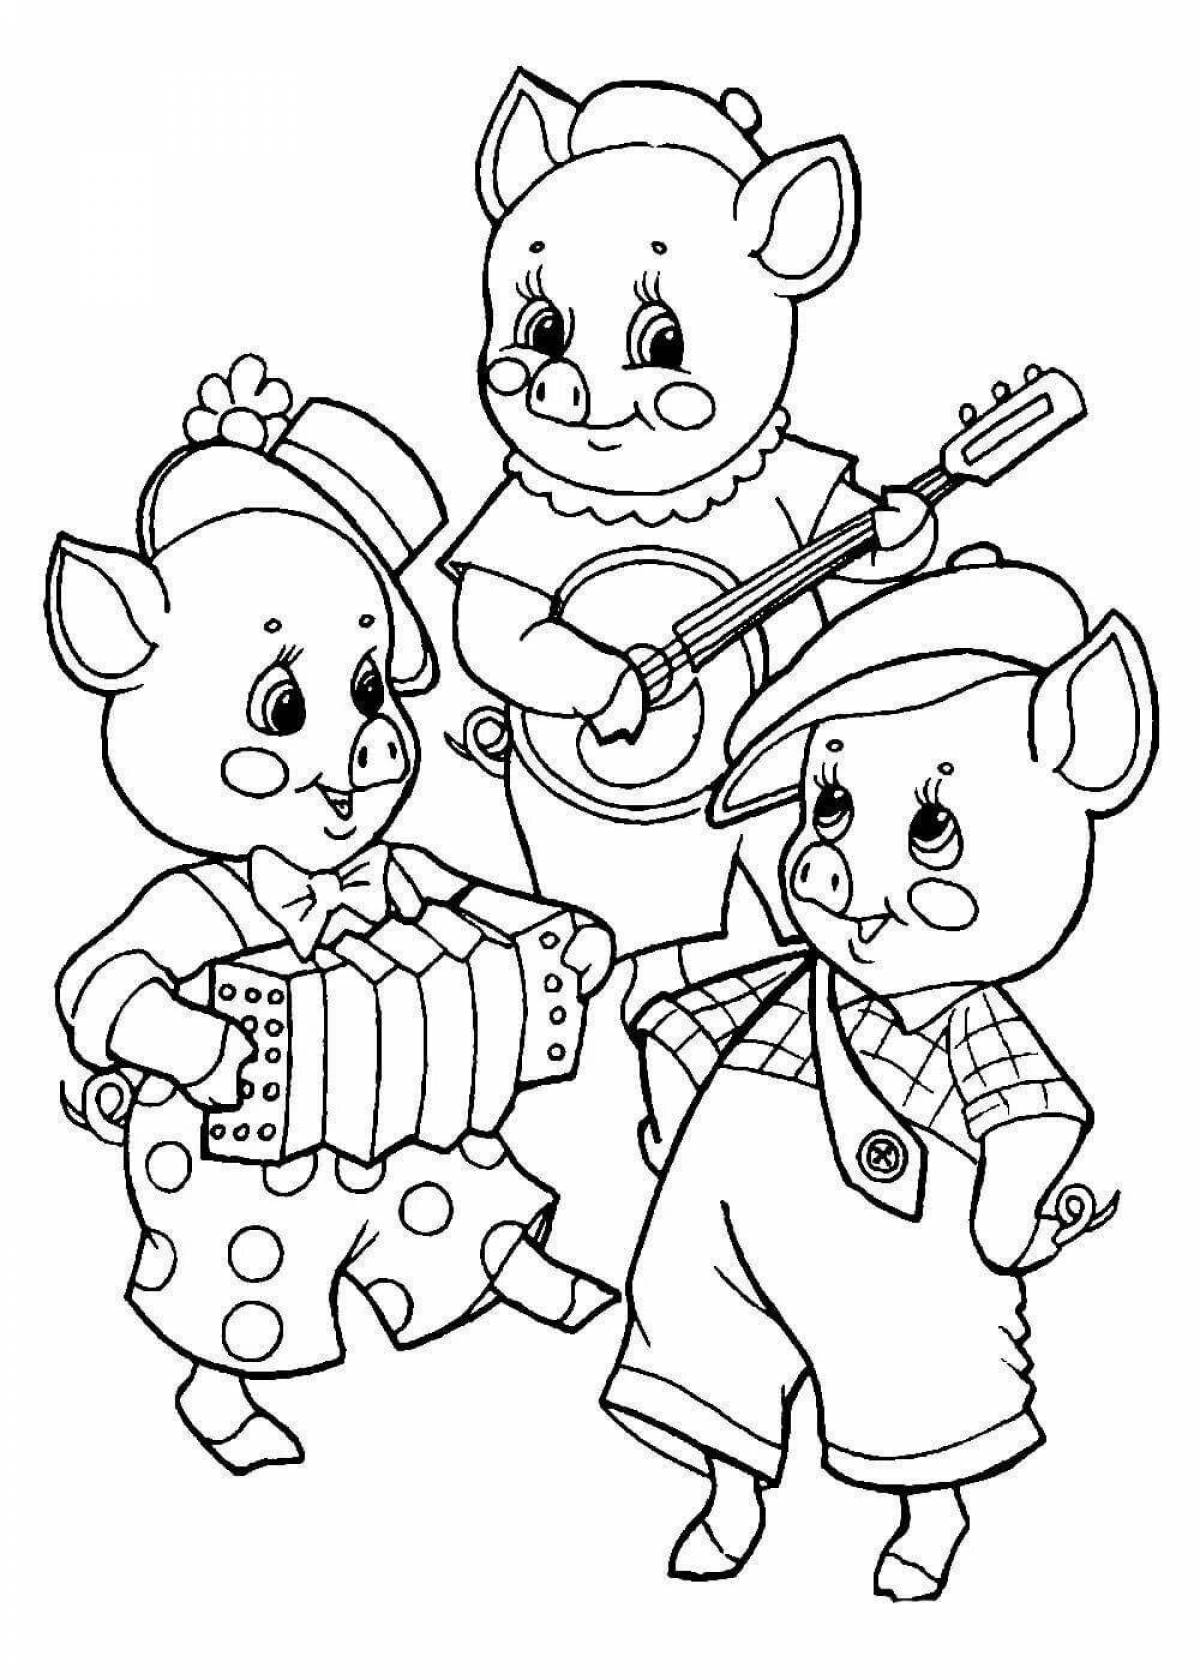 3 little pigs coloring book for preschoolers